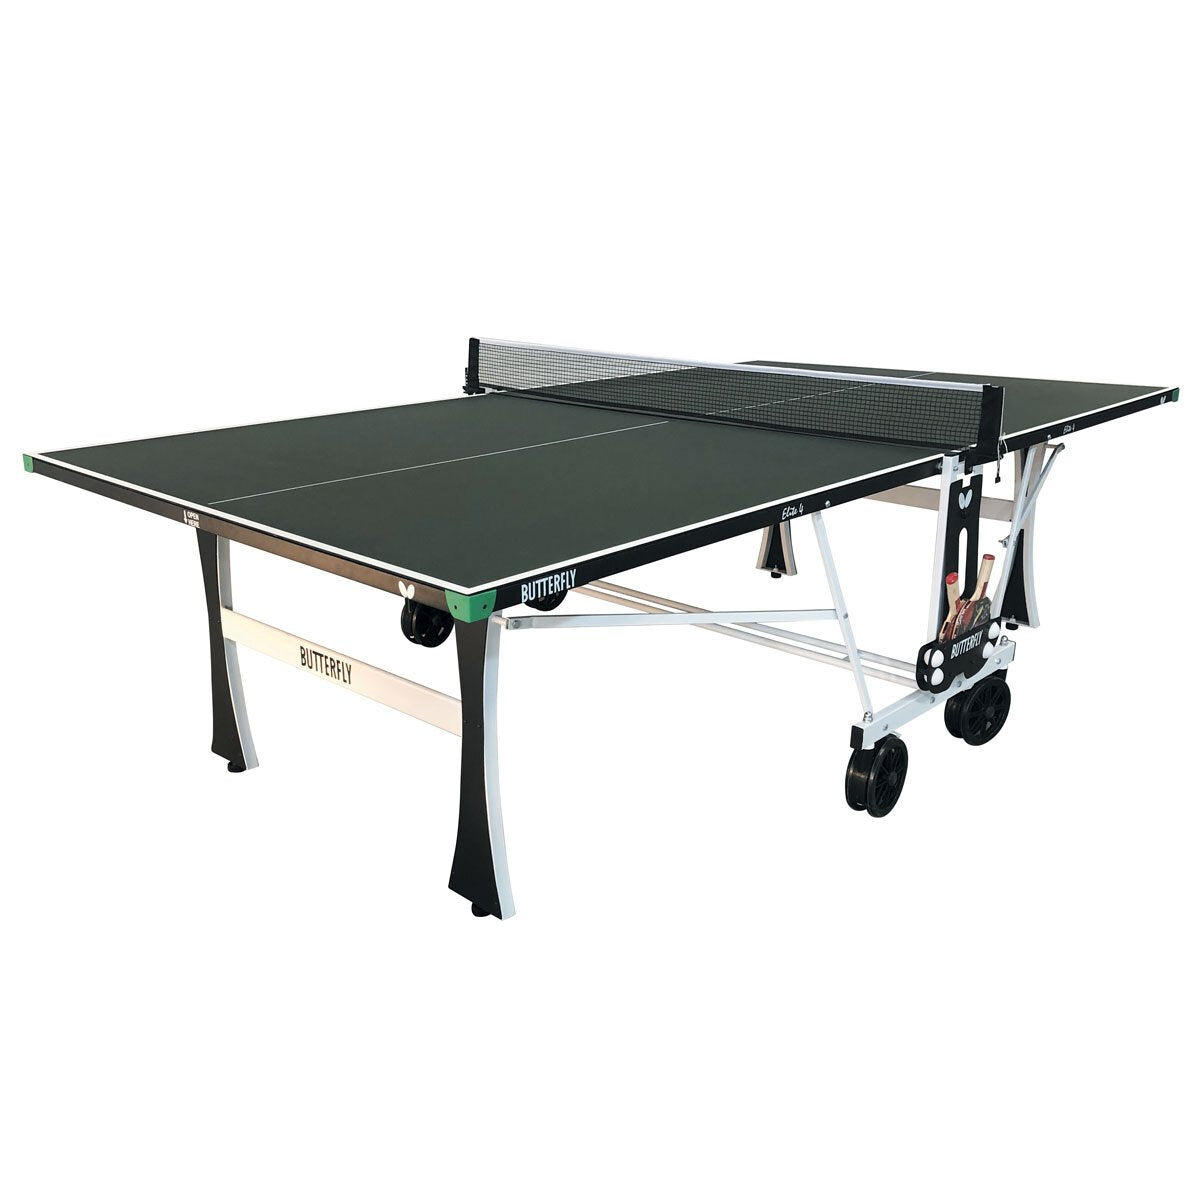 Butterfly Elite 4 Outdoor Table Tennis Table